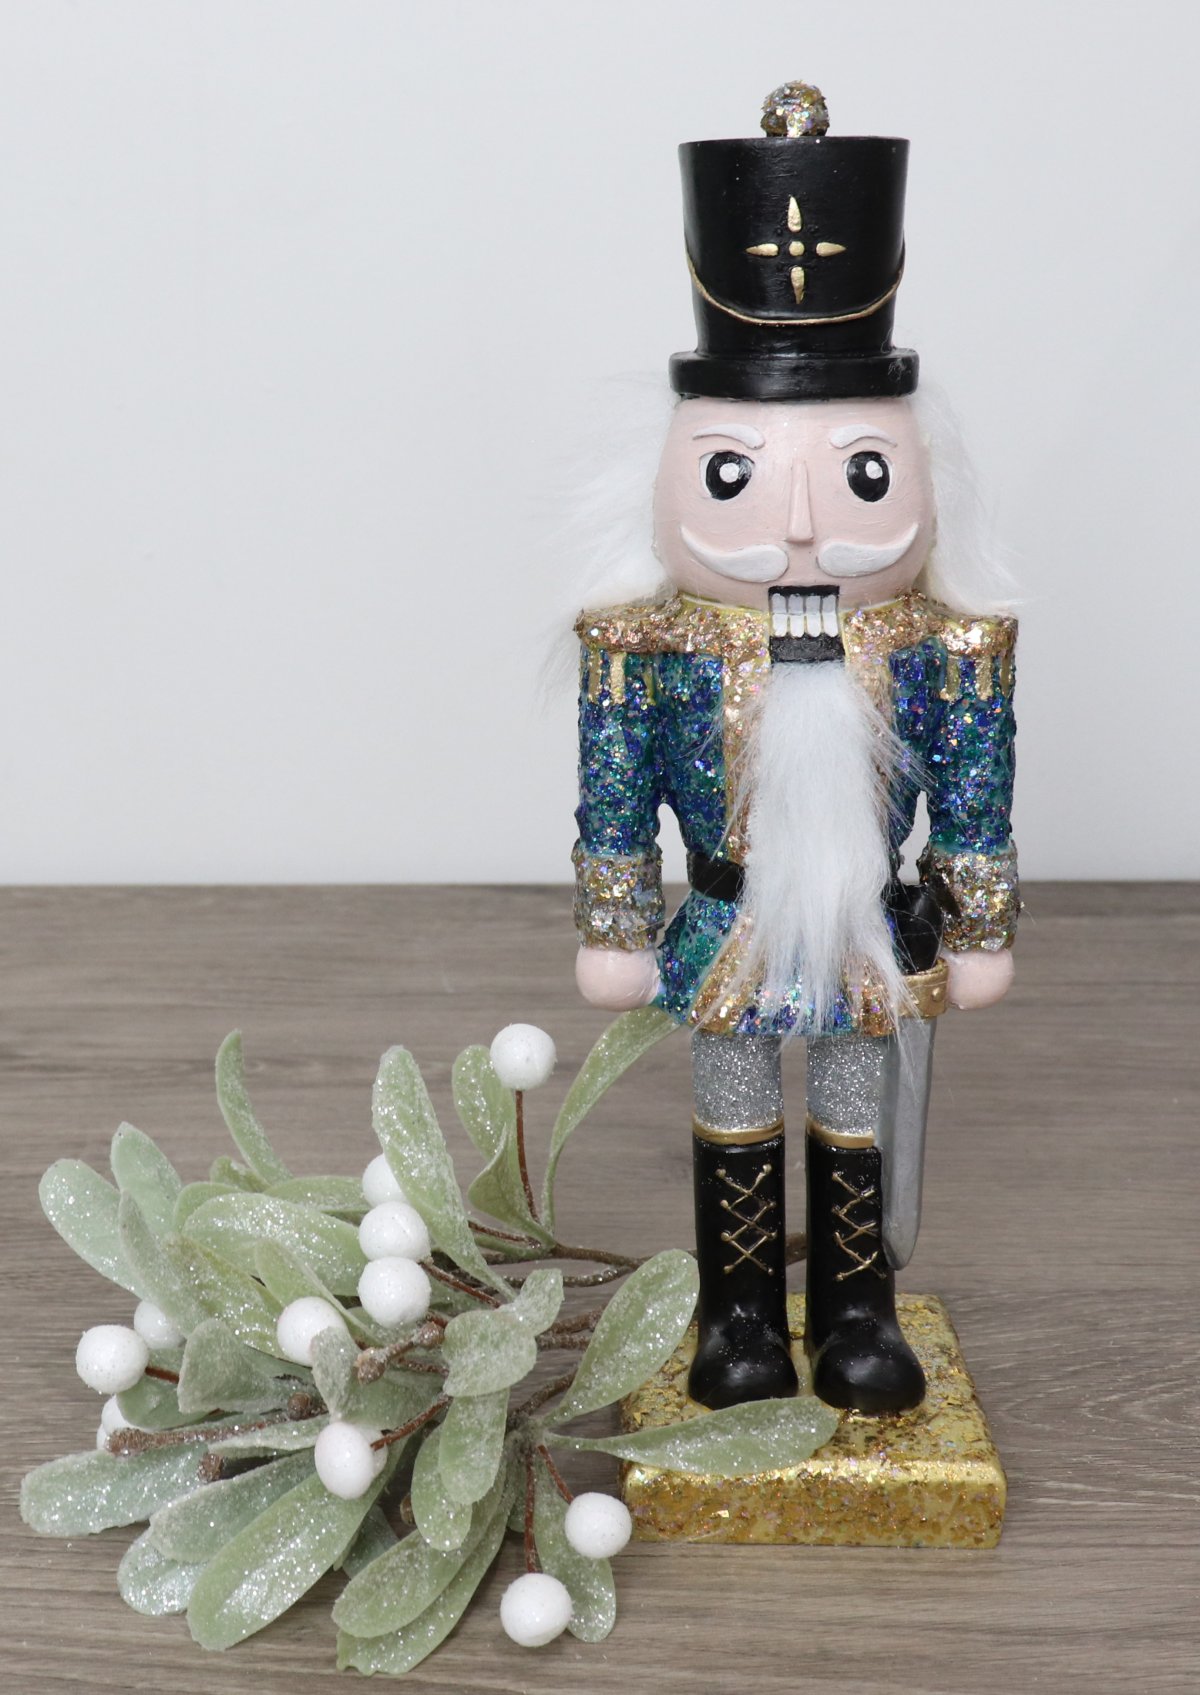 Image contains a hand-painted Nutcracker figurine with a black hat and a glittered blue and gold jacket, next to a sprig of mistletoe.